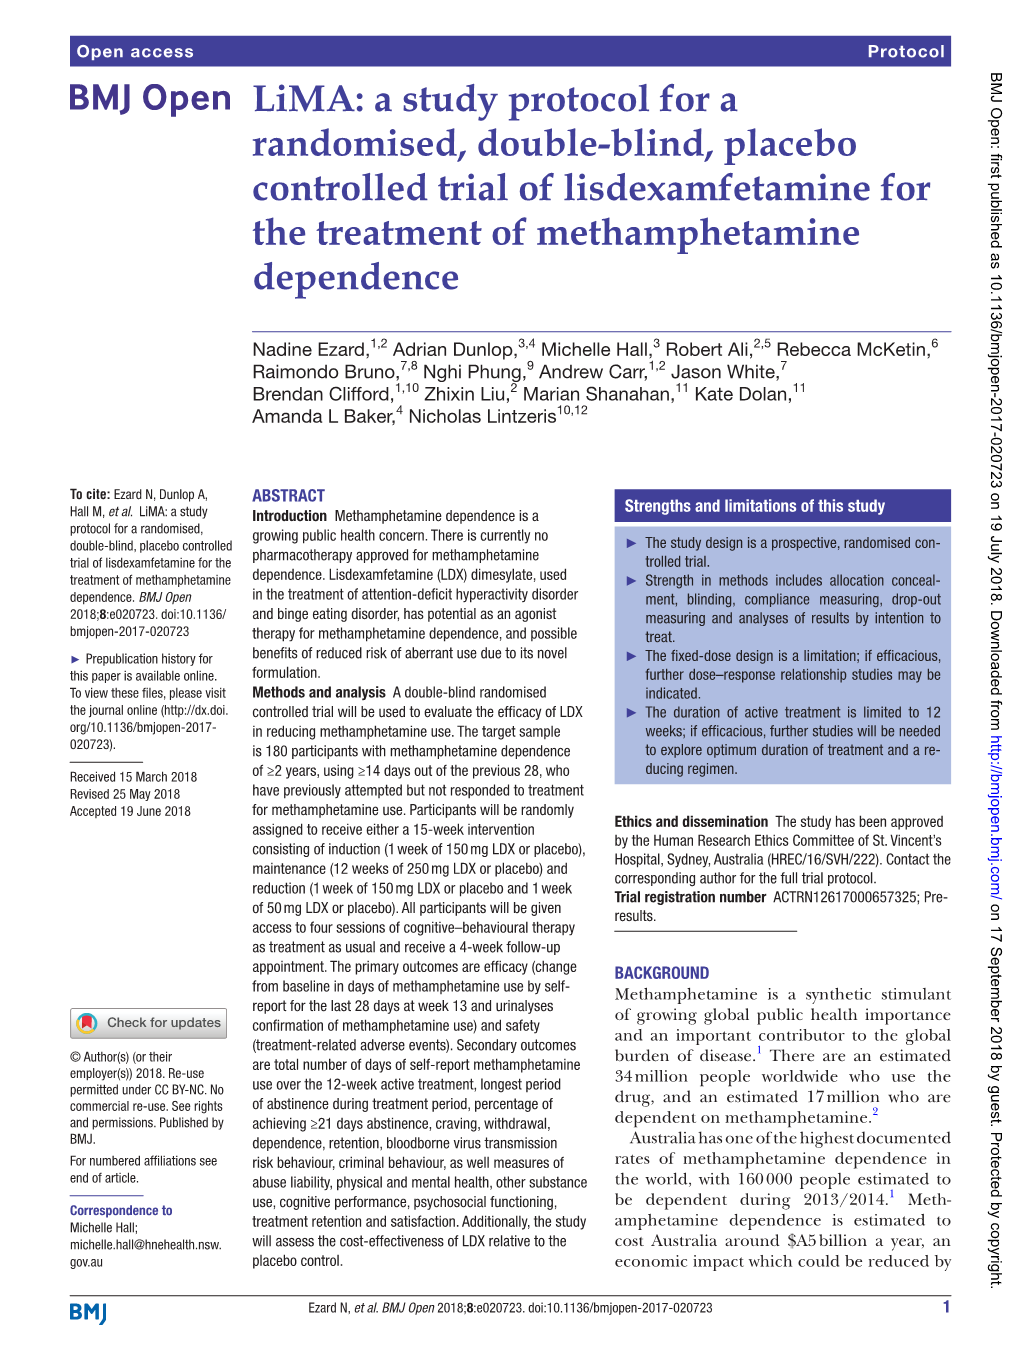 A Study Protocol for a Randomised, Double-Blind, Placebo Controlled Trial of Lisdexamfetamine for the Treatment of Methamphetamine Dependence